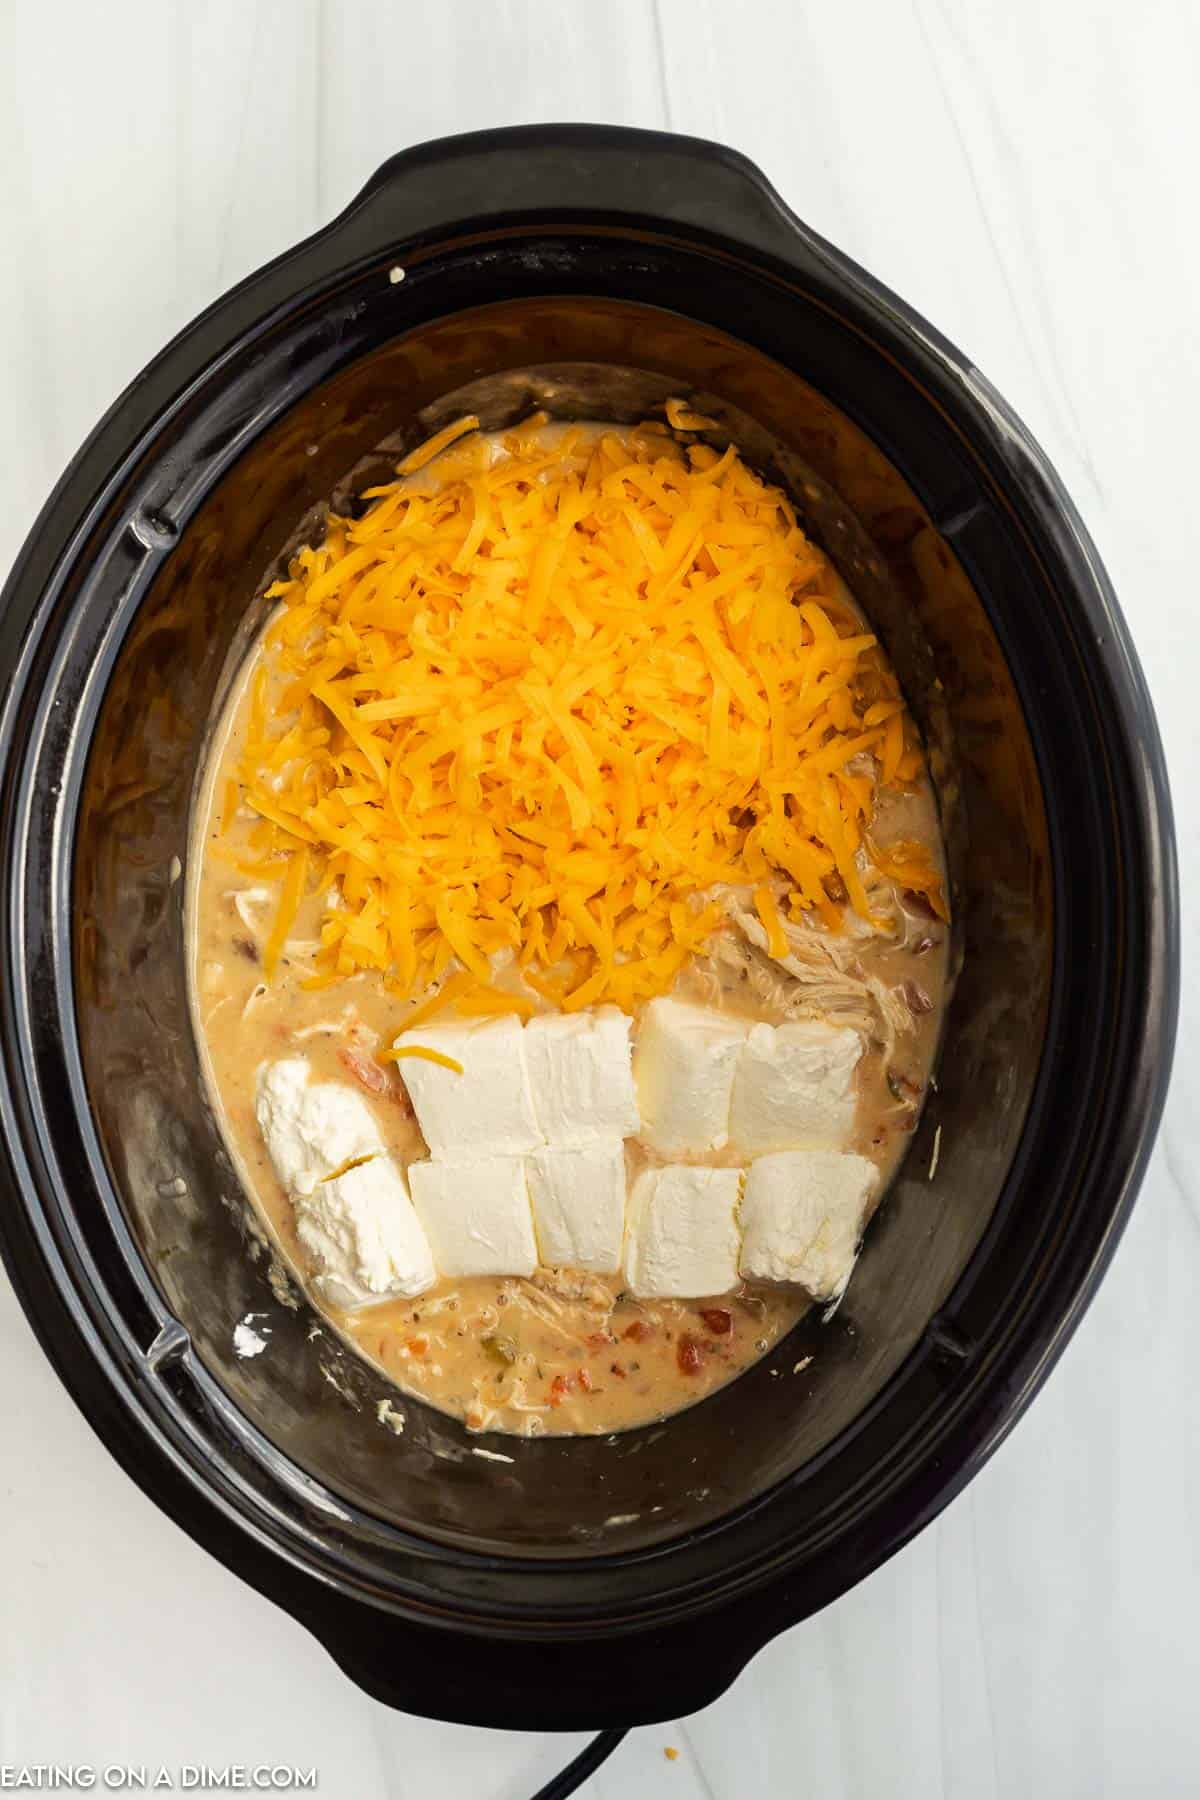 Topping the cooked chicken mixture with shredded cheese and cubed cream cheese in the slow cooker